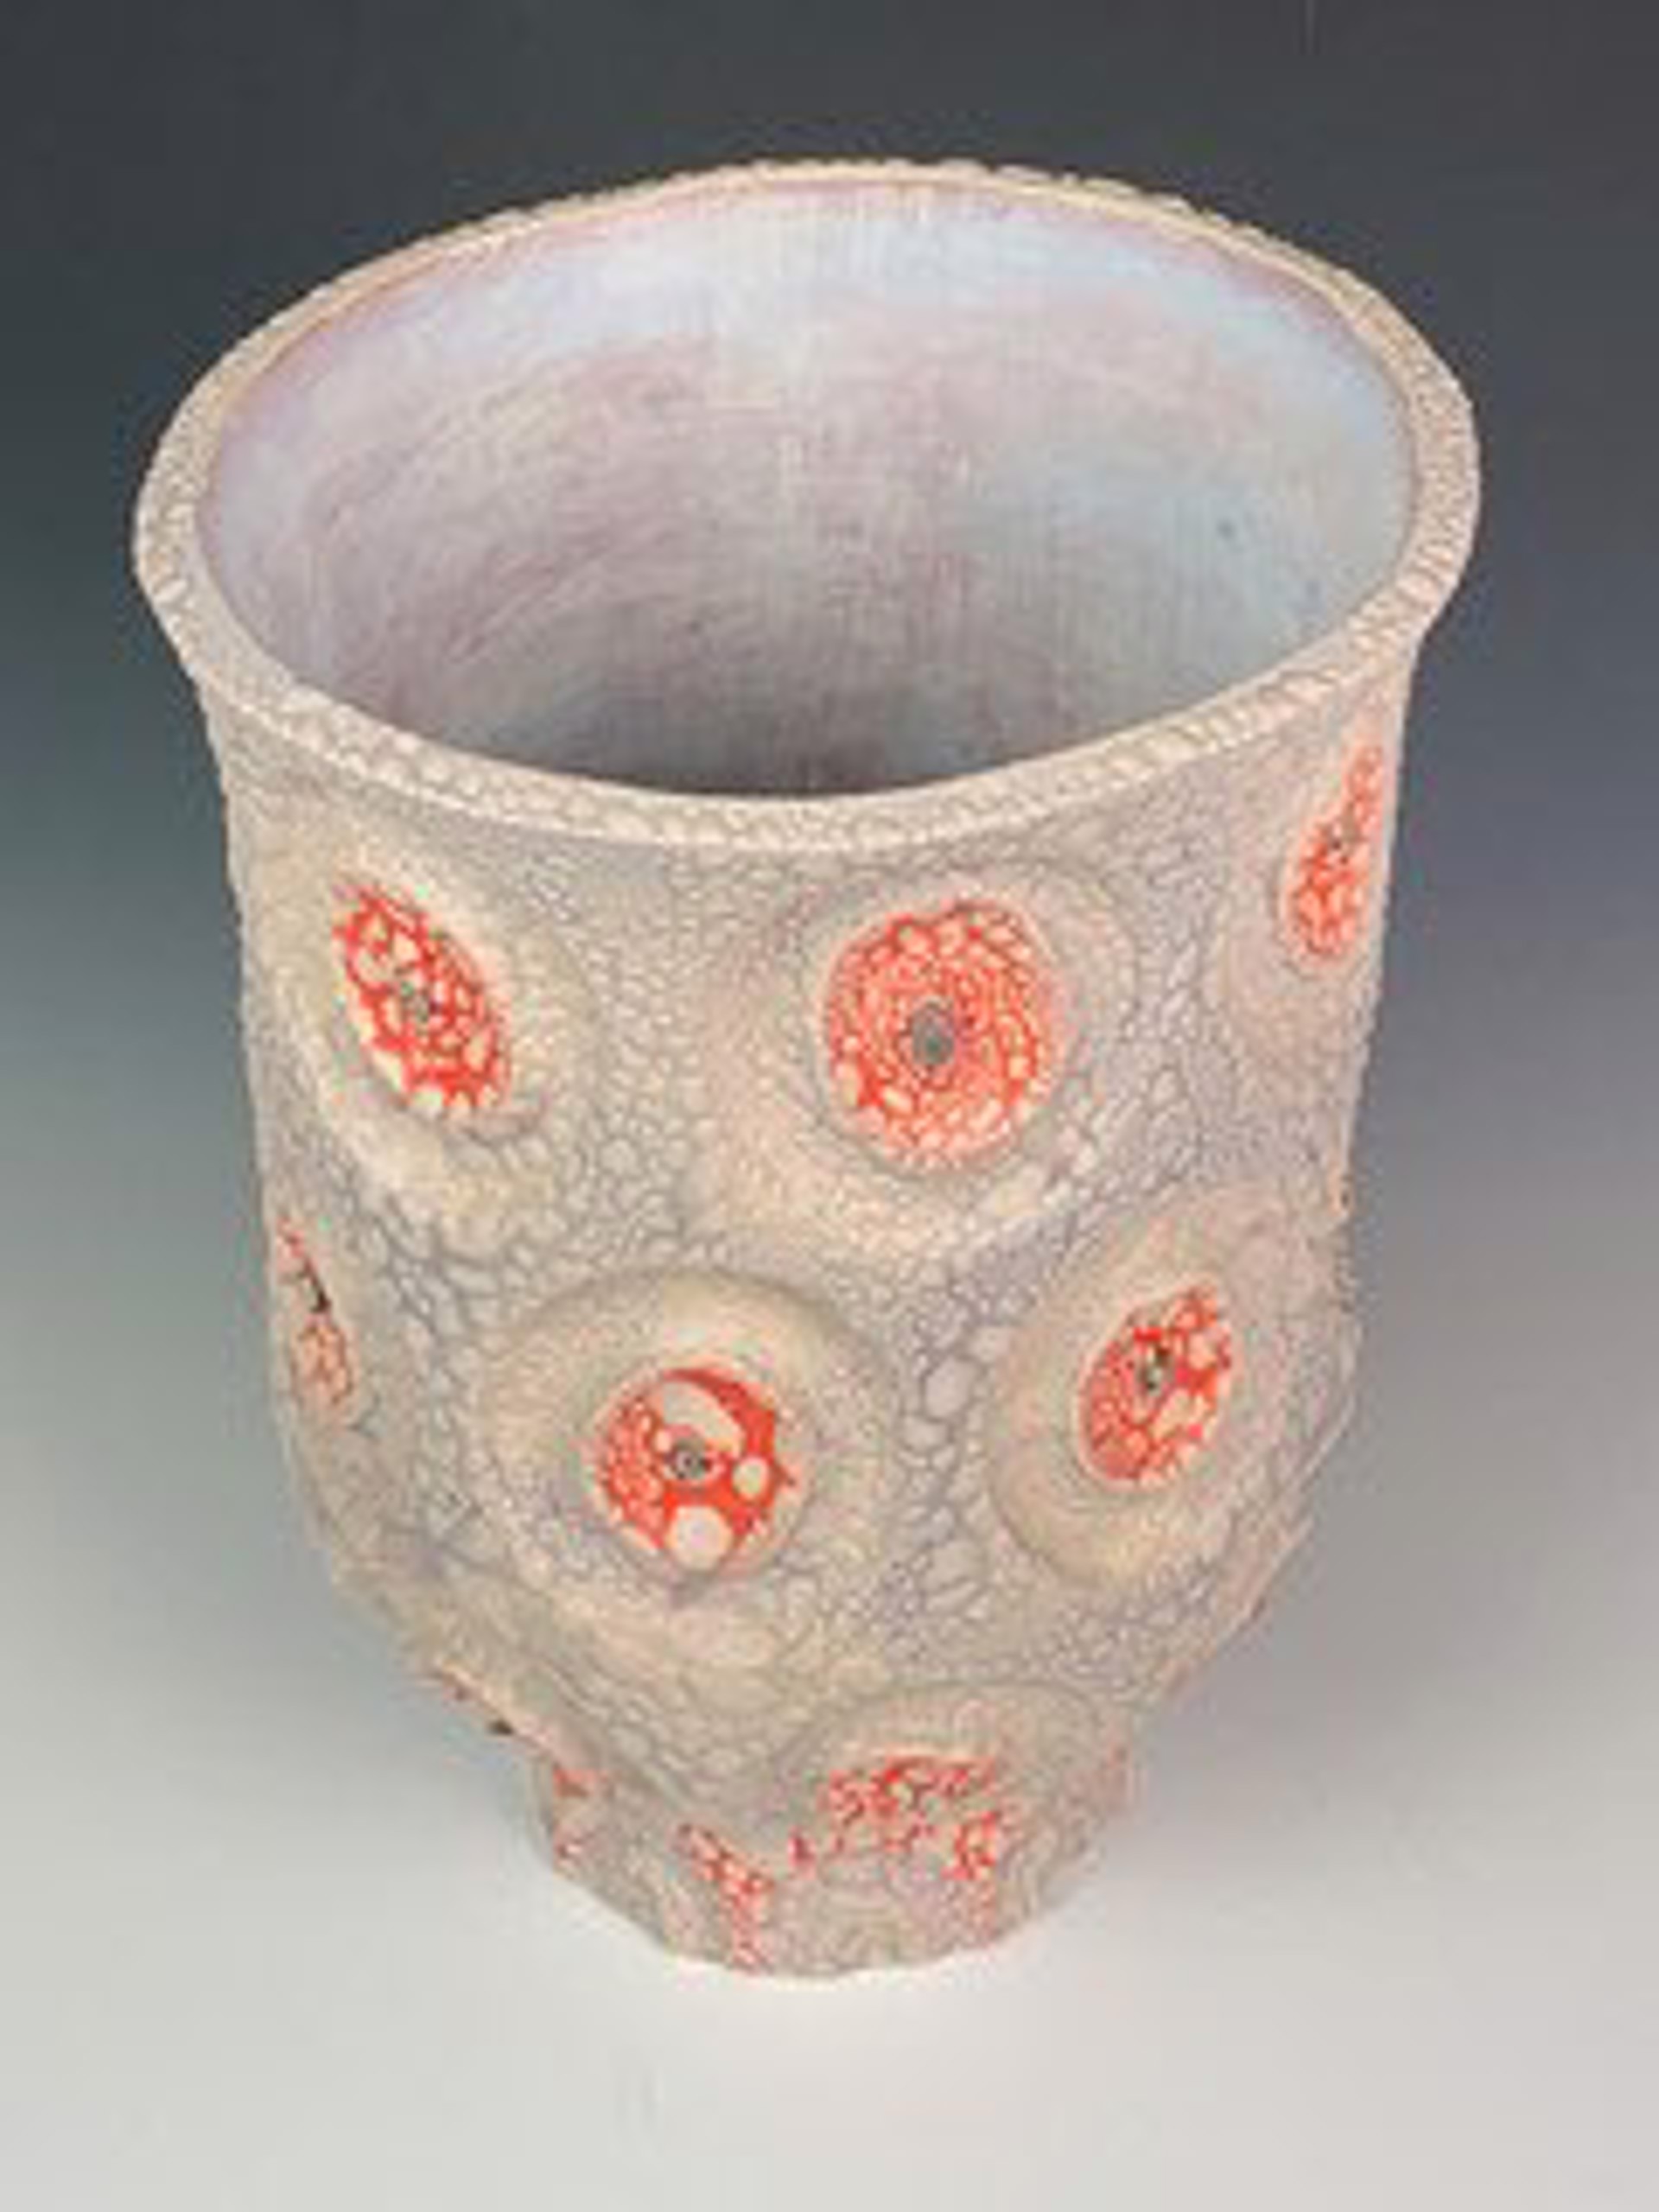 Earthenware With Textured Slips And Glazes by Robert Milnes